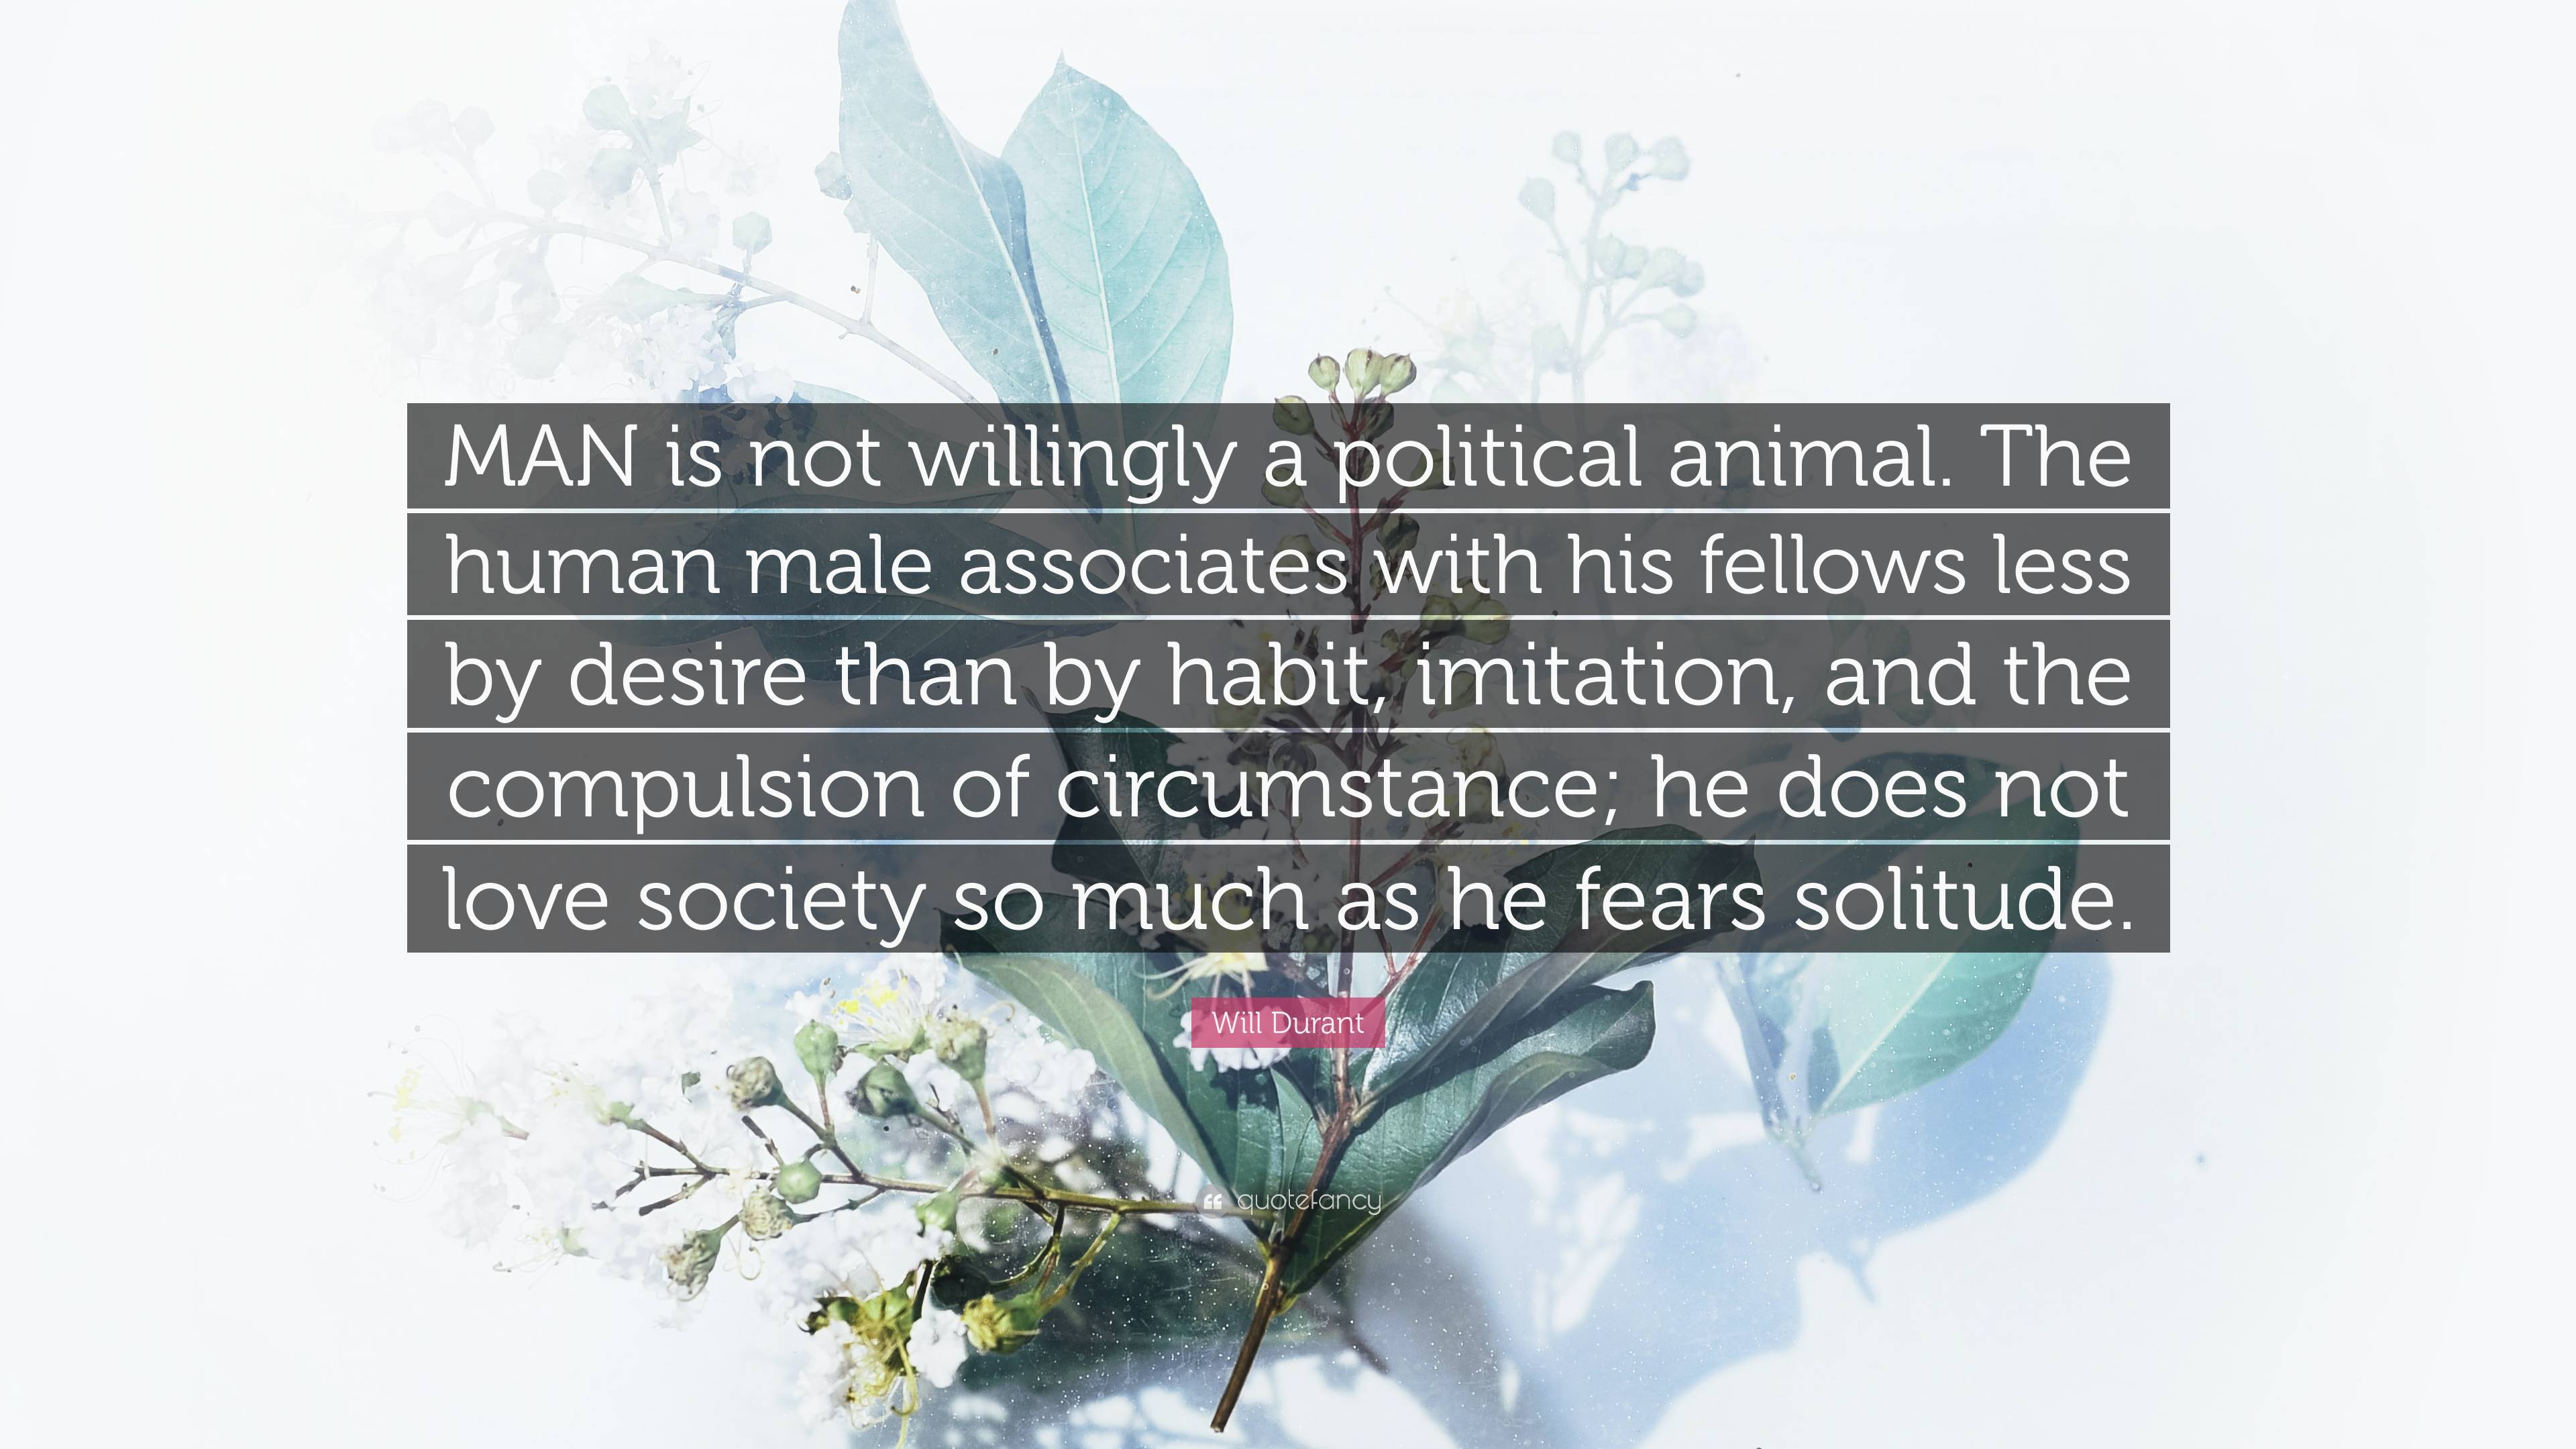 Will Durant Quote: “MAN is not willingly a political animal. The human male  associates with his fellows less by desire than by habit, imitat...”